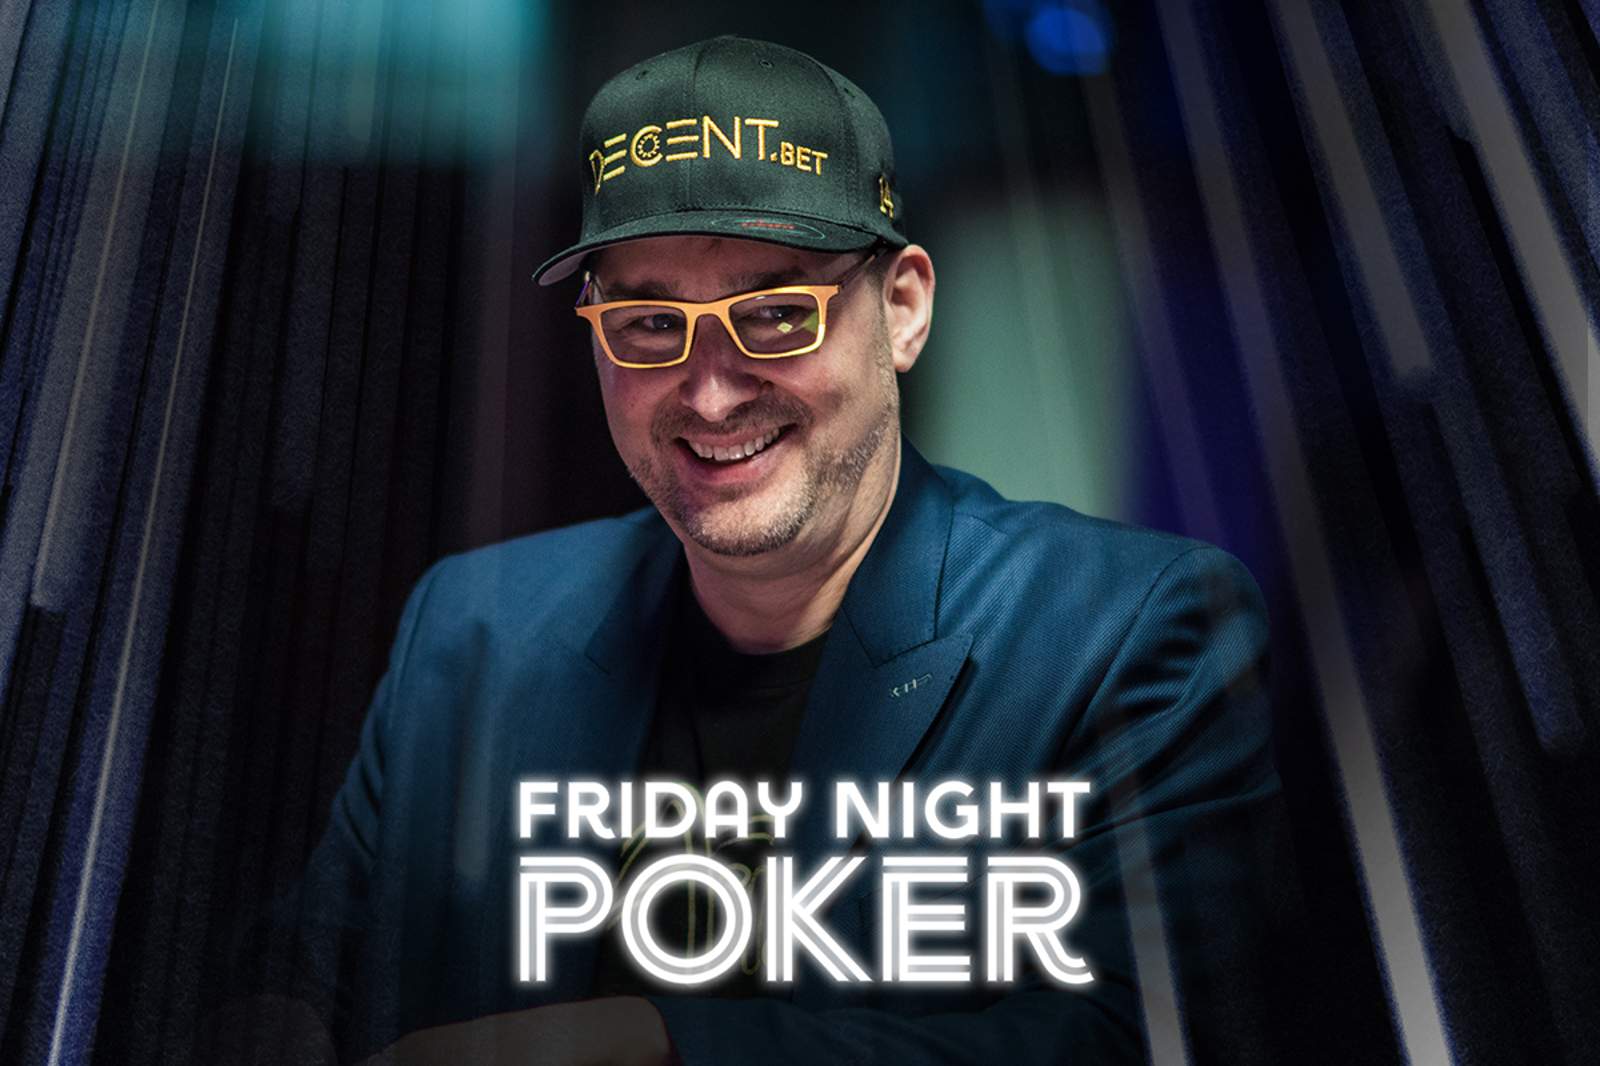 Food, Drinks and Laughs on Friday Night Poker!